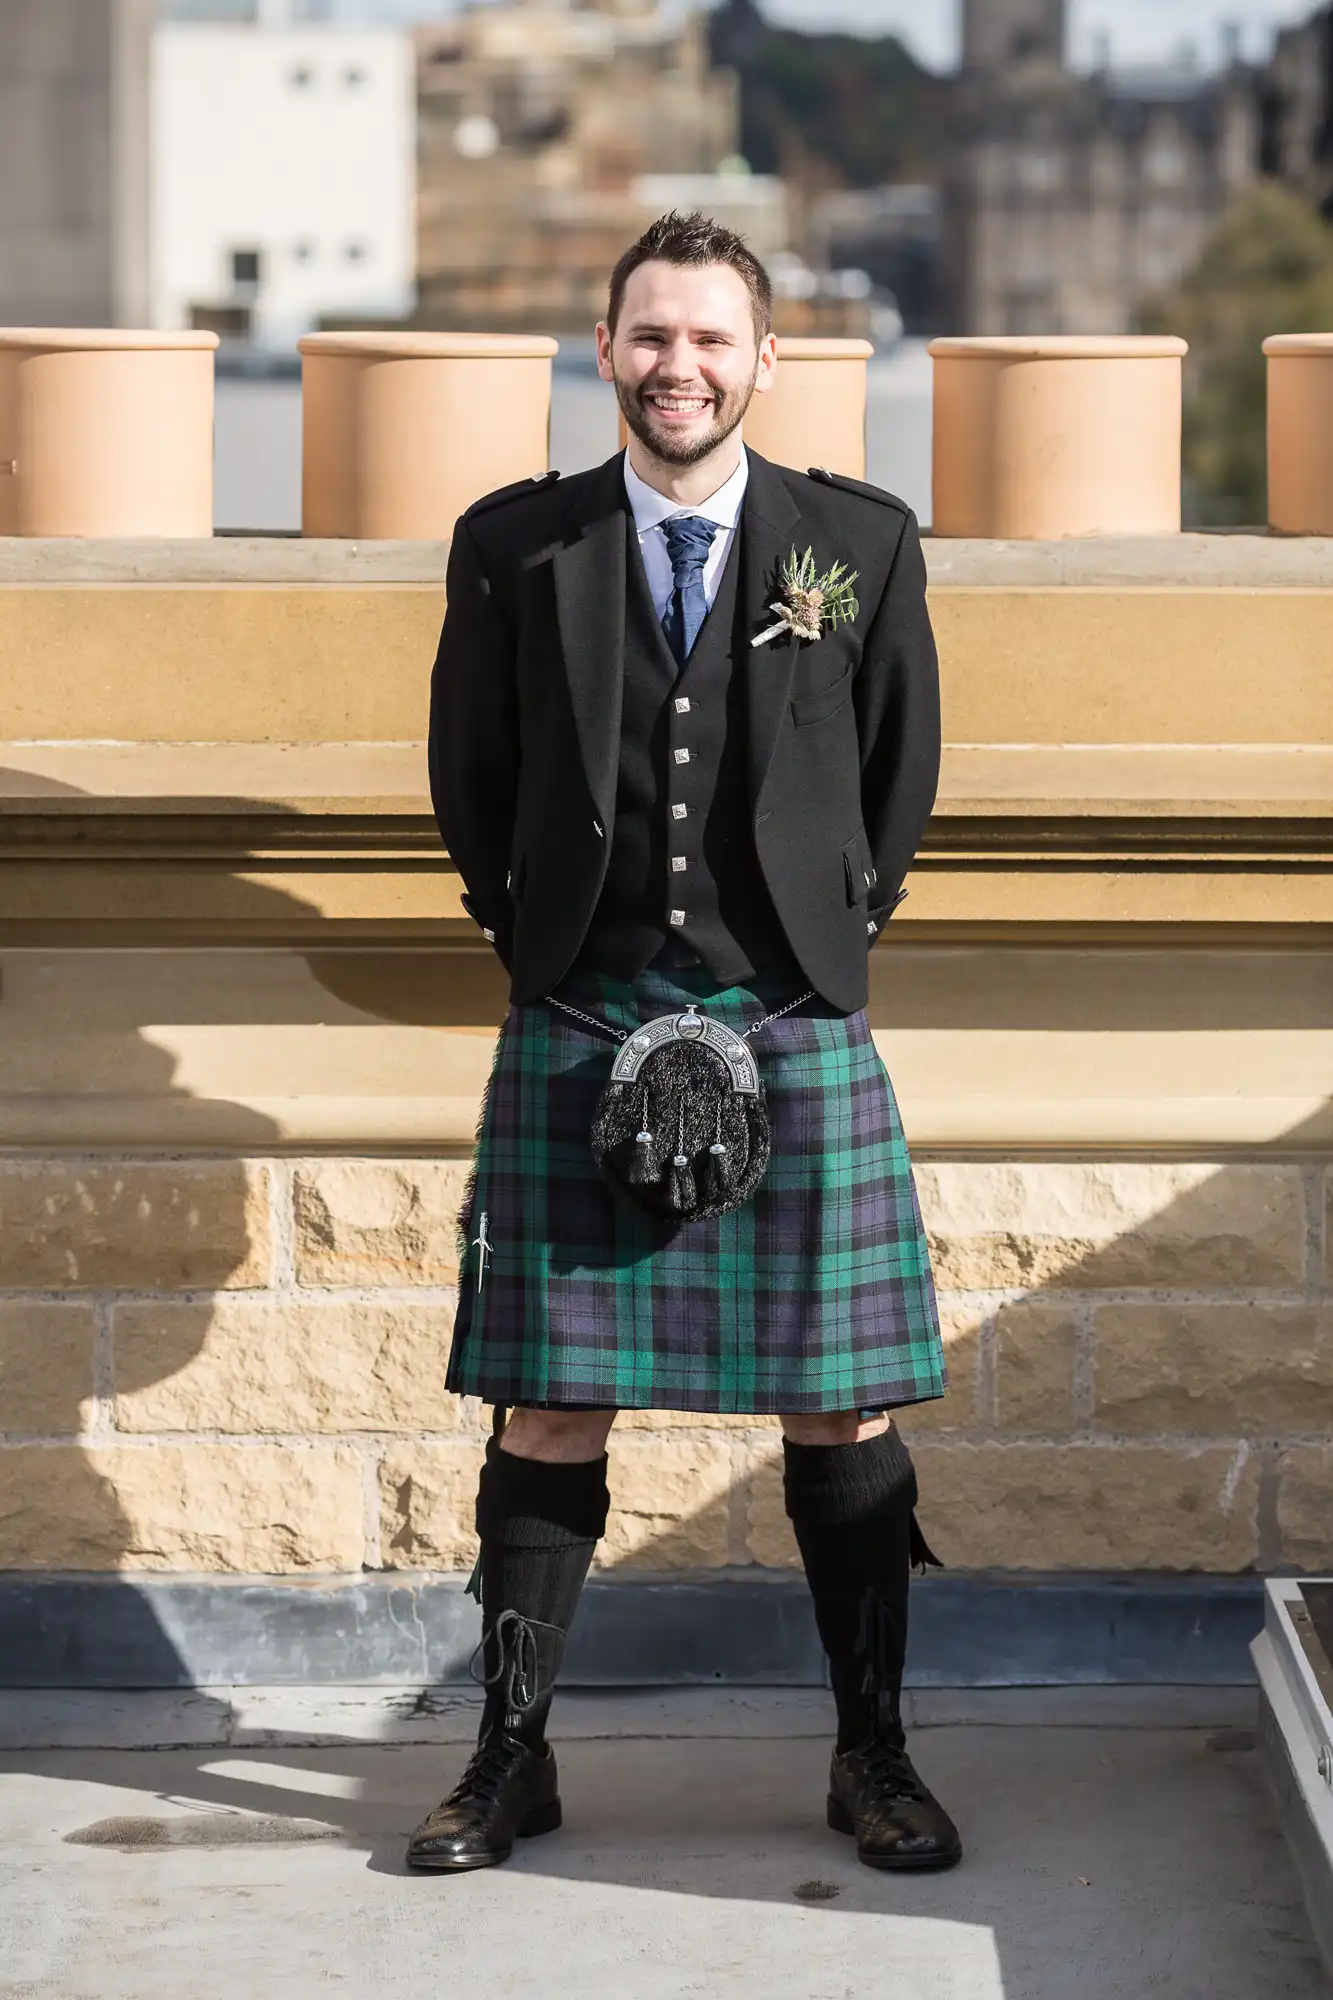 Man in traditional scottish attire including a kilt, sporran, and jacket, smiling on a balcony with buildings in the background.